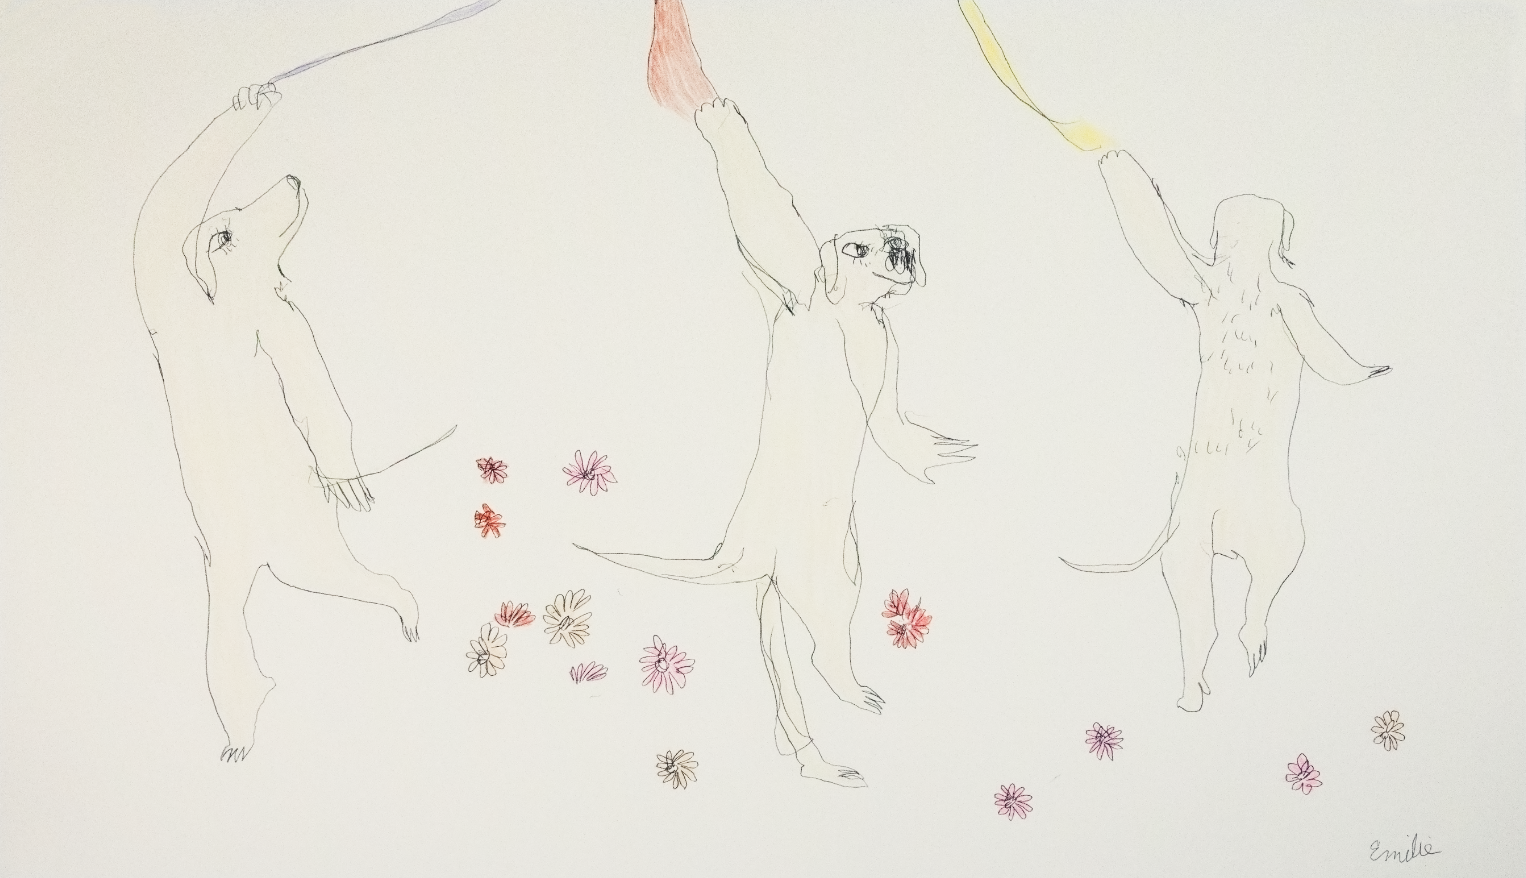 Emilie Gossiaux's Londons Dancing with Flowers is a drawing on white paper of Emilie's dog, London, dancing with other copies of her surrounded by colorful flowers.